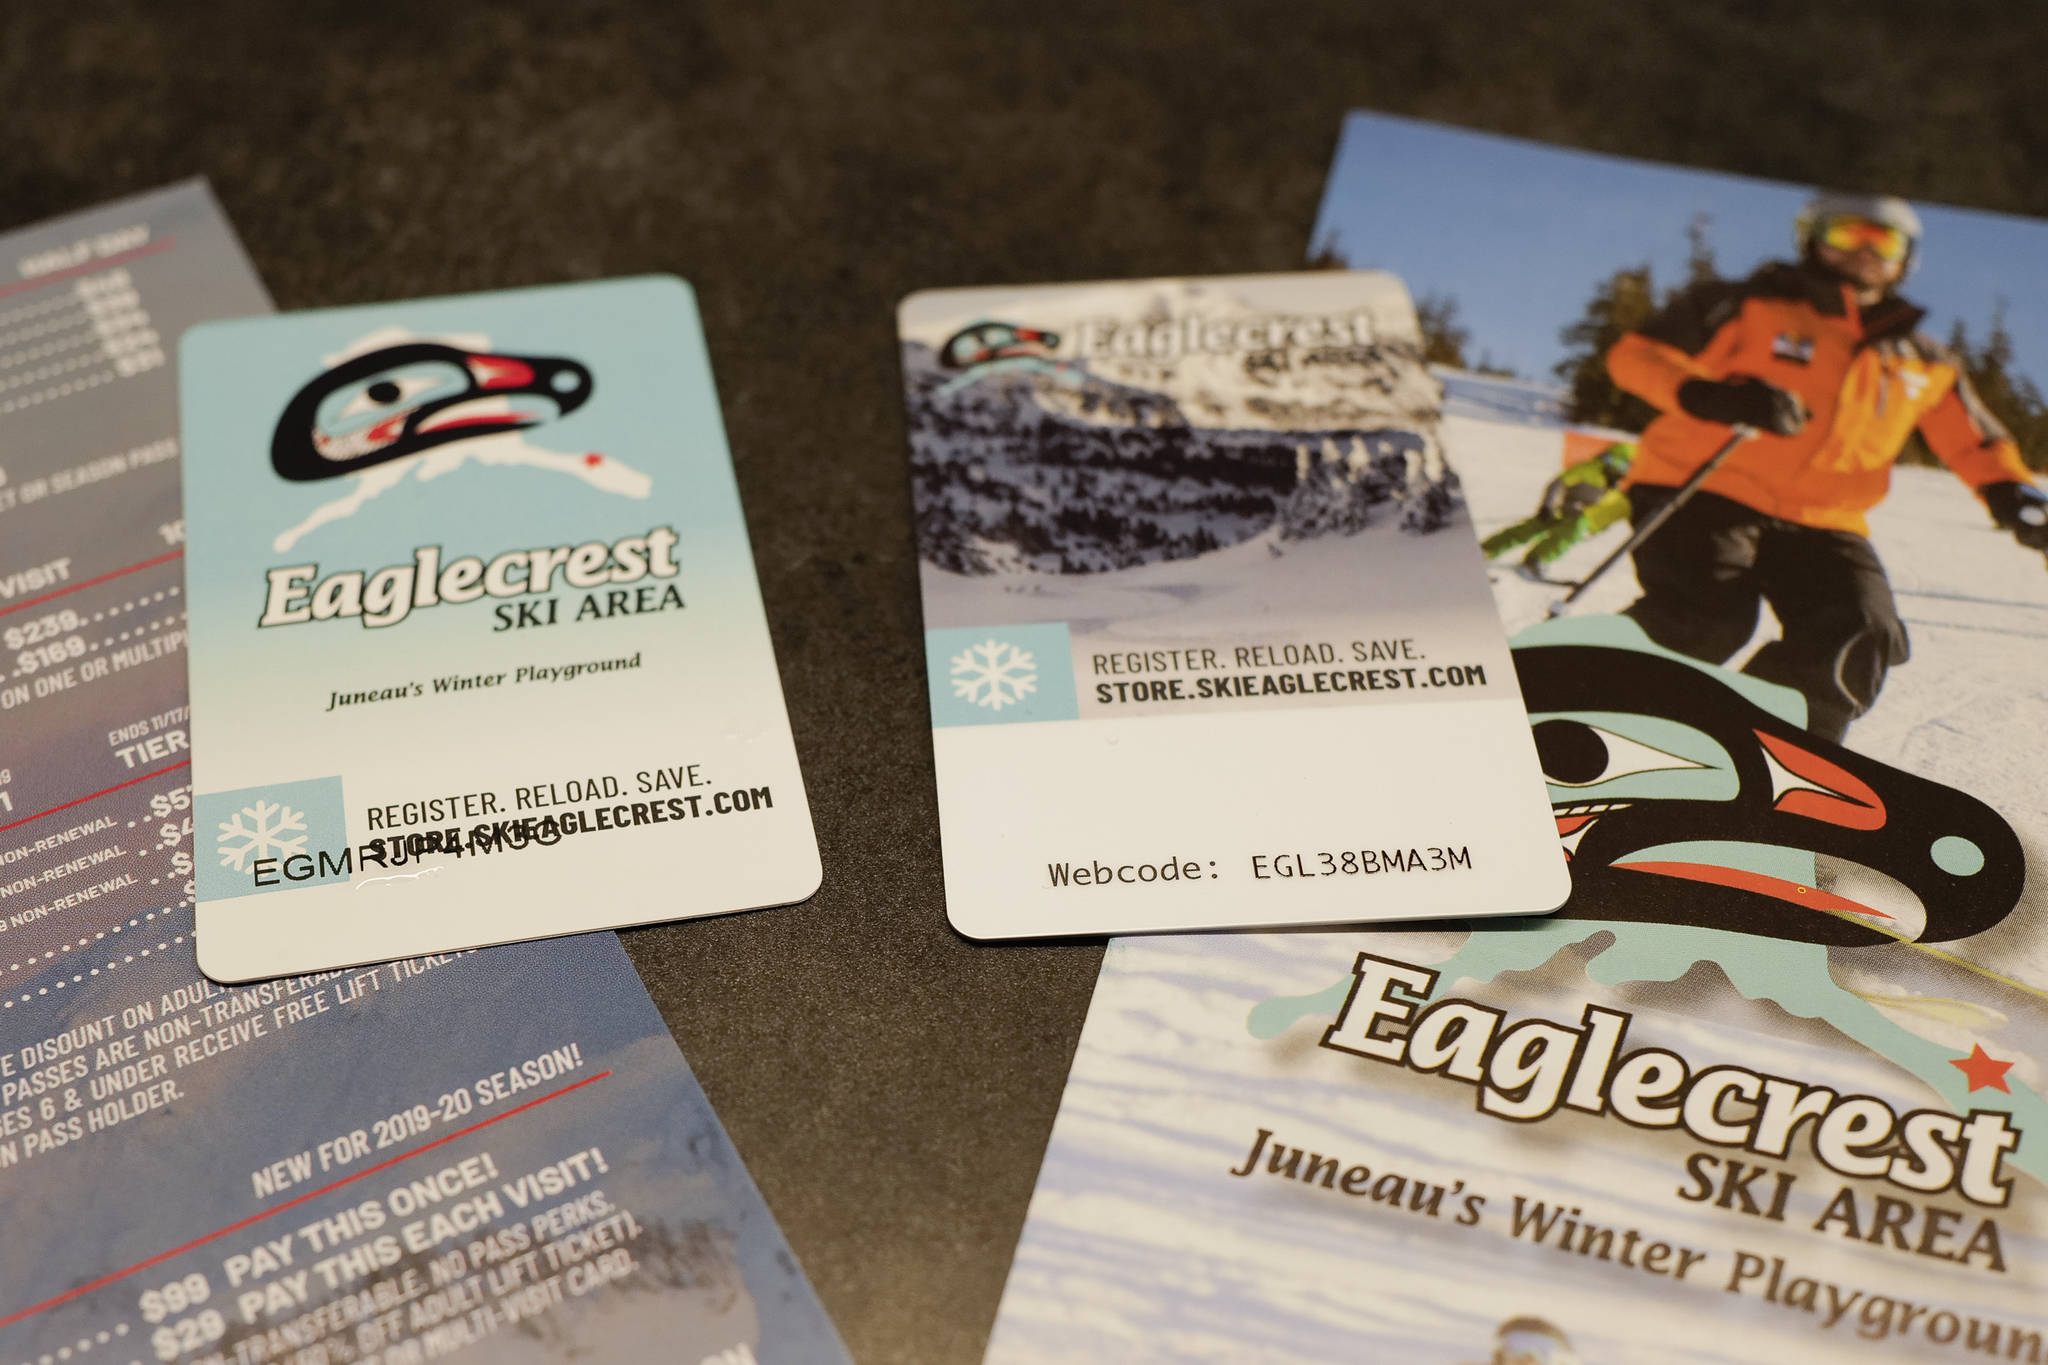 Day and season passes will make use of new radio-frequency identification gates at the Eaglecrest Ski Area. (Michael Penn | Juneau Empire)